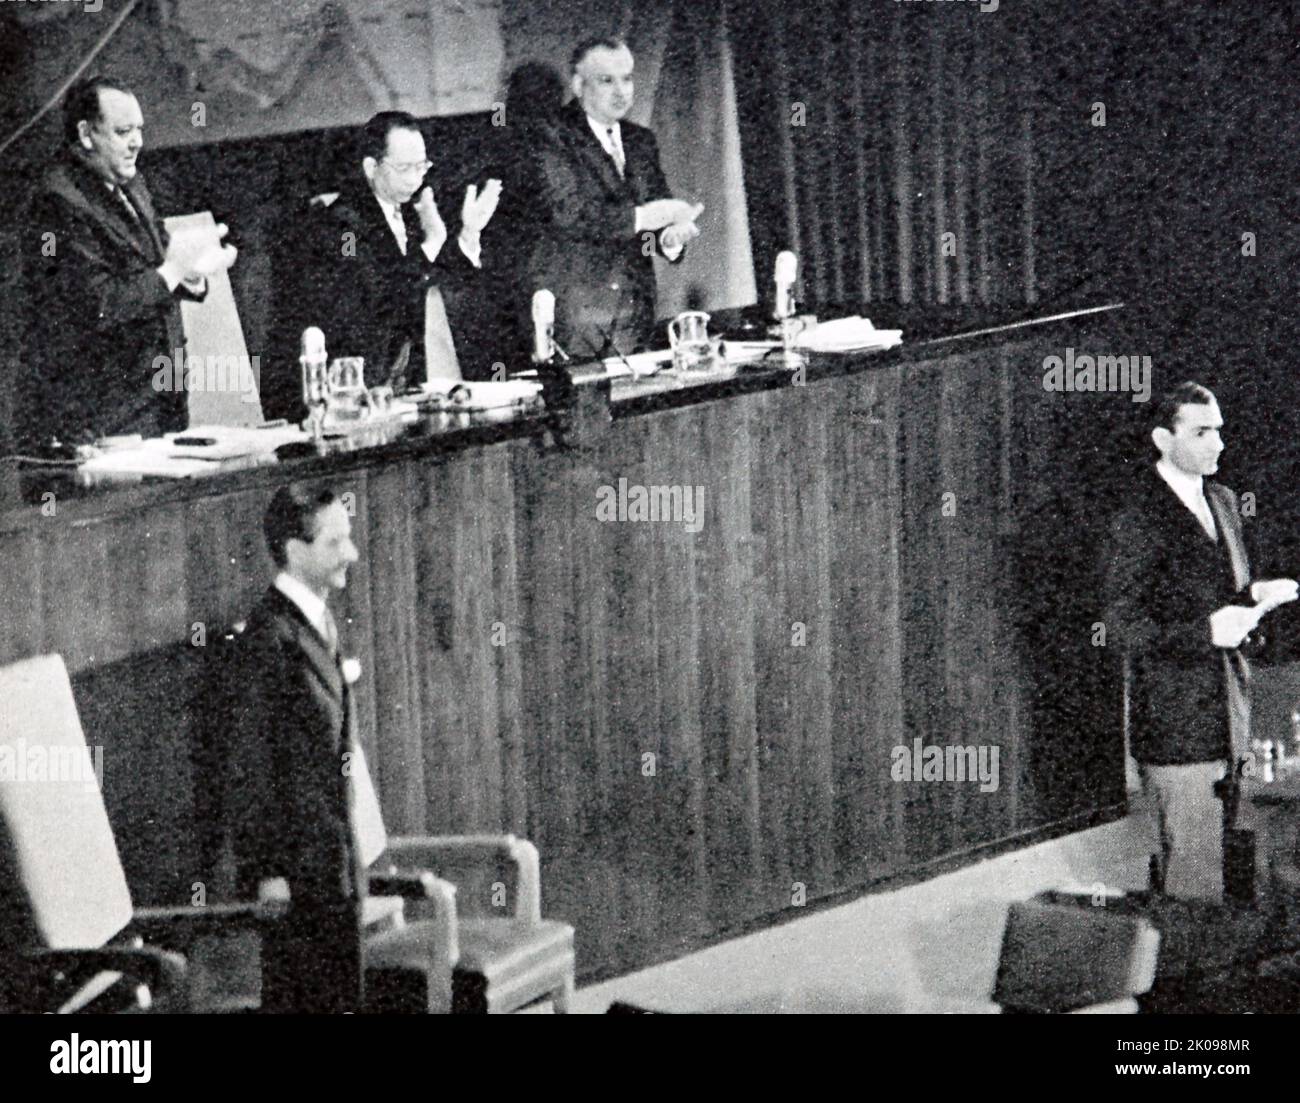 The Shah of Persia addresses the United Nations General Assembly in New York. The United Nations General Assembly is one of the six principal organs of the United Nations (UN), serving as the main deliberative, policymaking, and representative organ of the UN. Its powers, composition, functions, and procedures are set out in Chapter IV of the United Nations Charter. Stock Photo